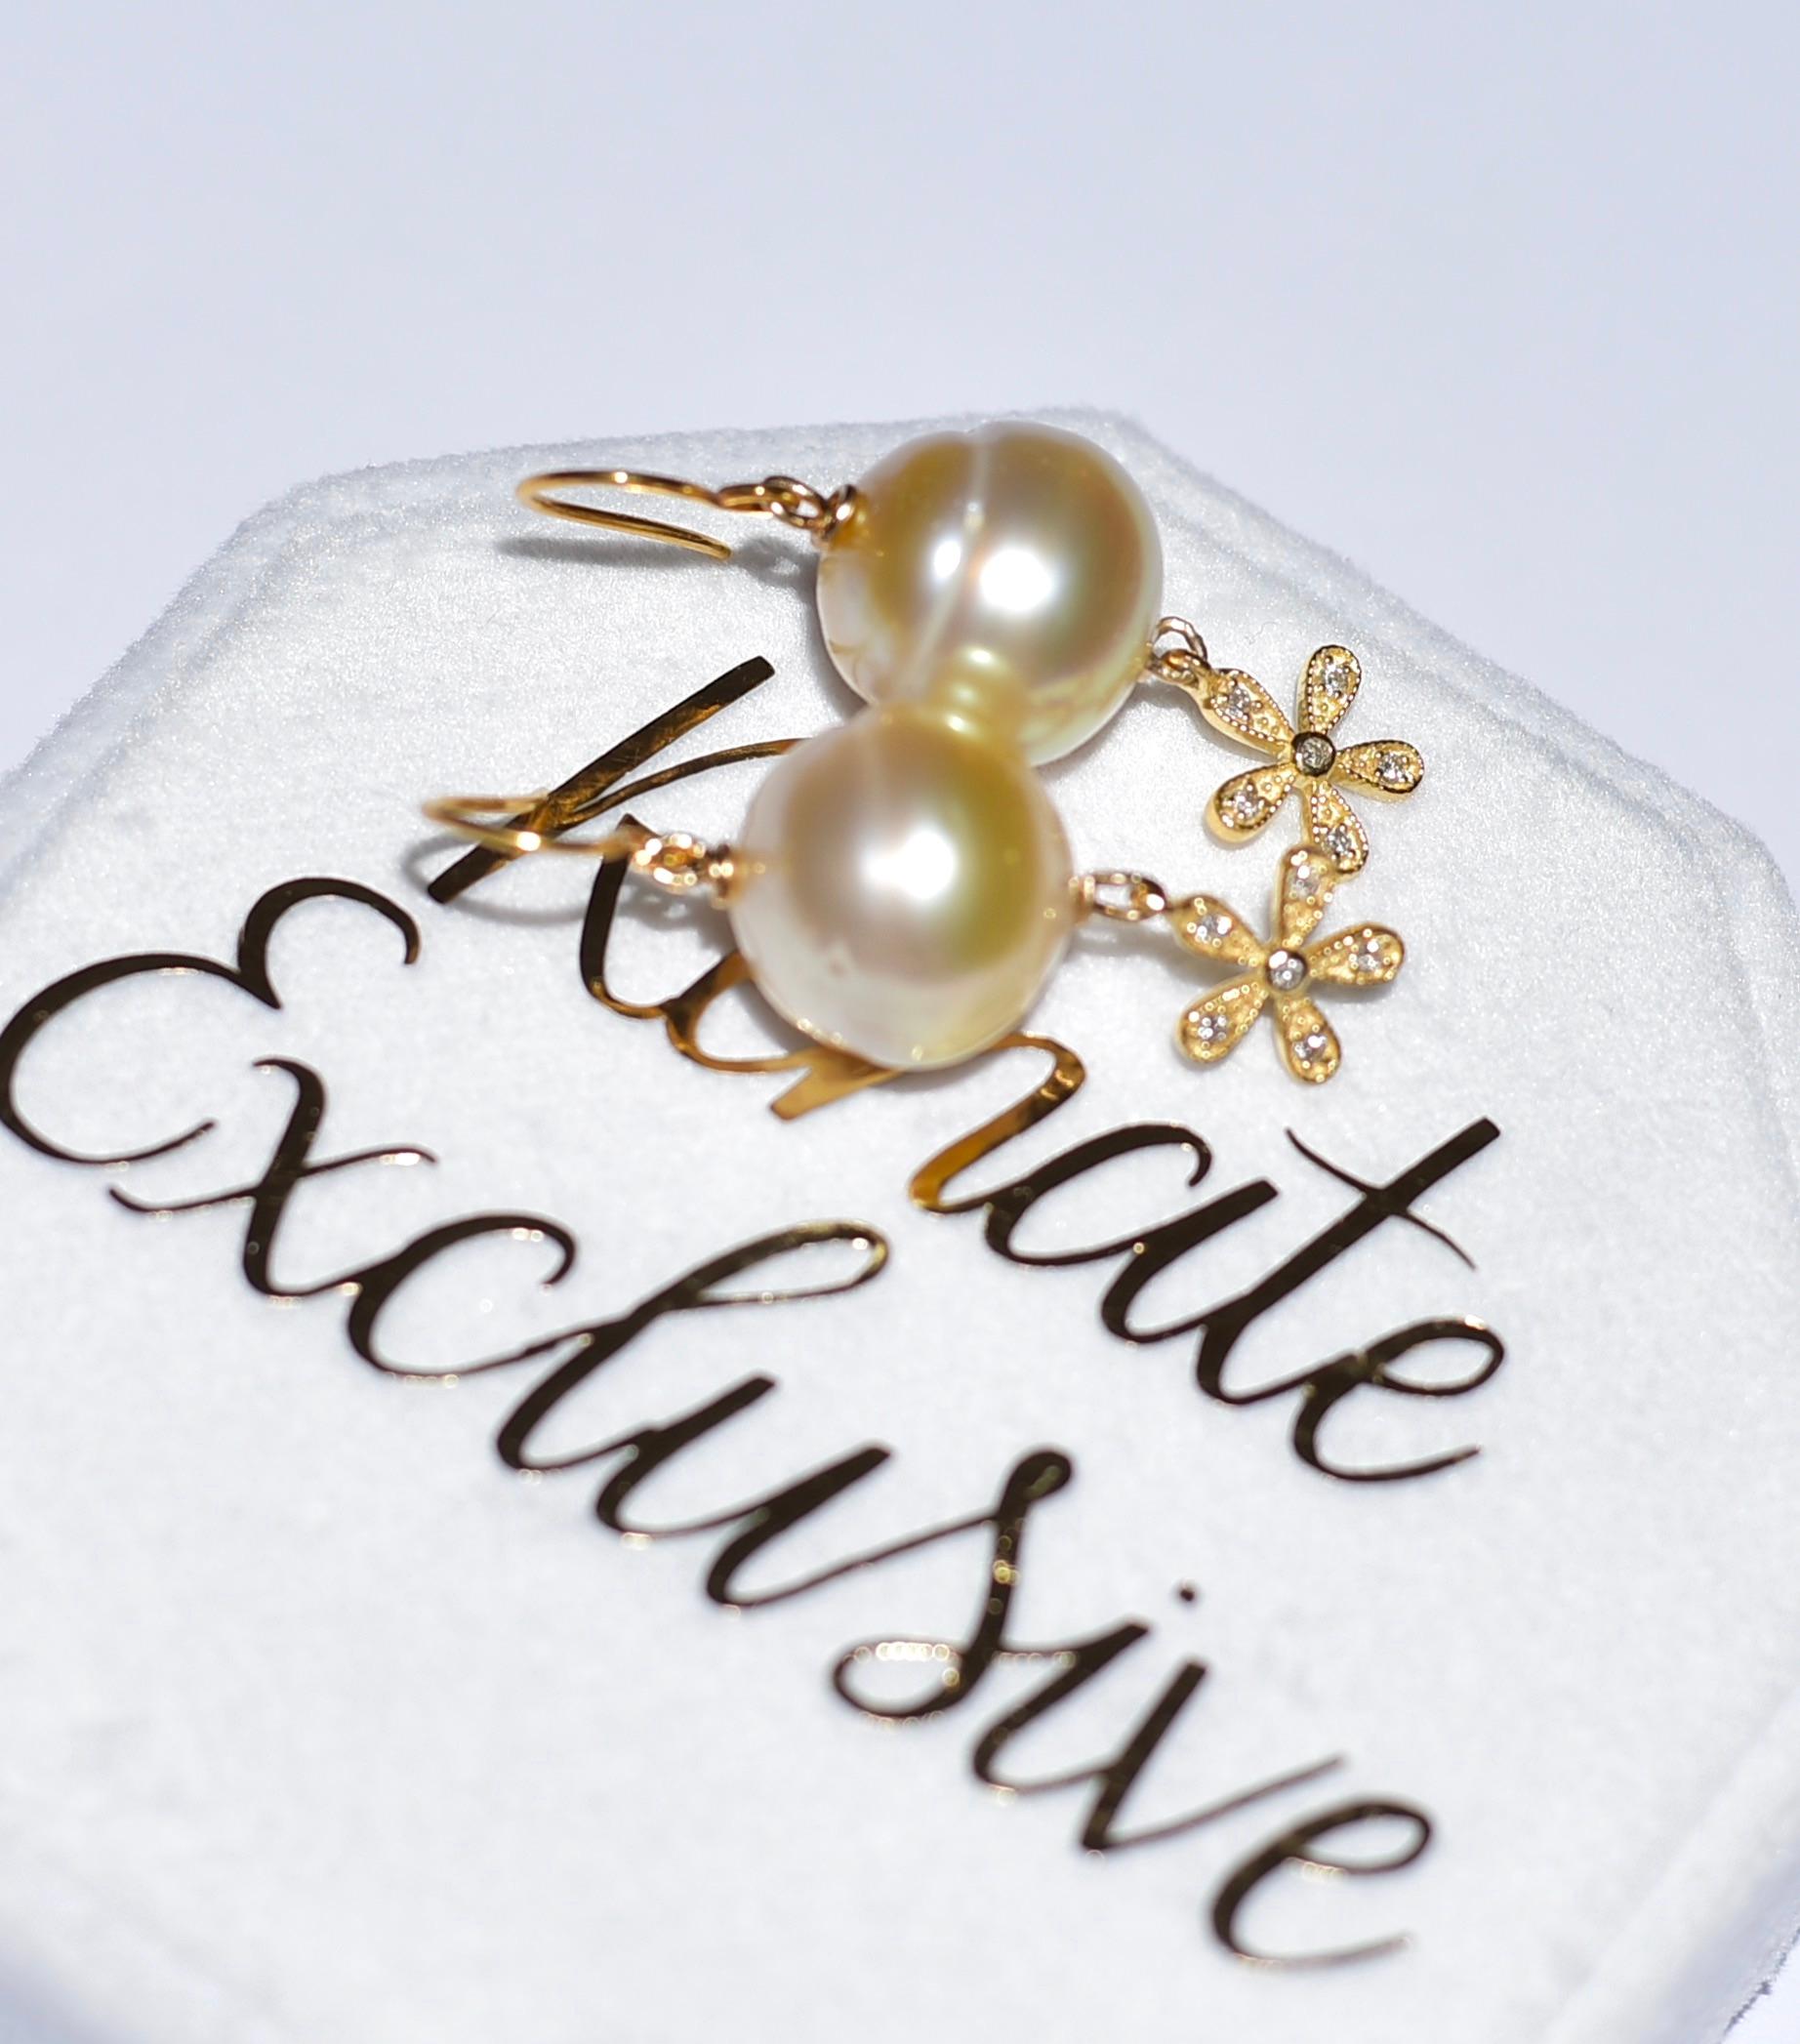 If you like pearls and diamonds, then this simple and beautiful piece of jewelry is for you!
Light Golden South Sea Cultured Pearl (13,2mm x 14mm) with sparkling and cute 14K solid Yellow Gold Diamond 5 petal flower Charm. Absolutely lovely look!